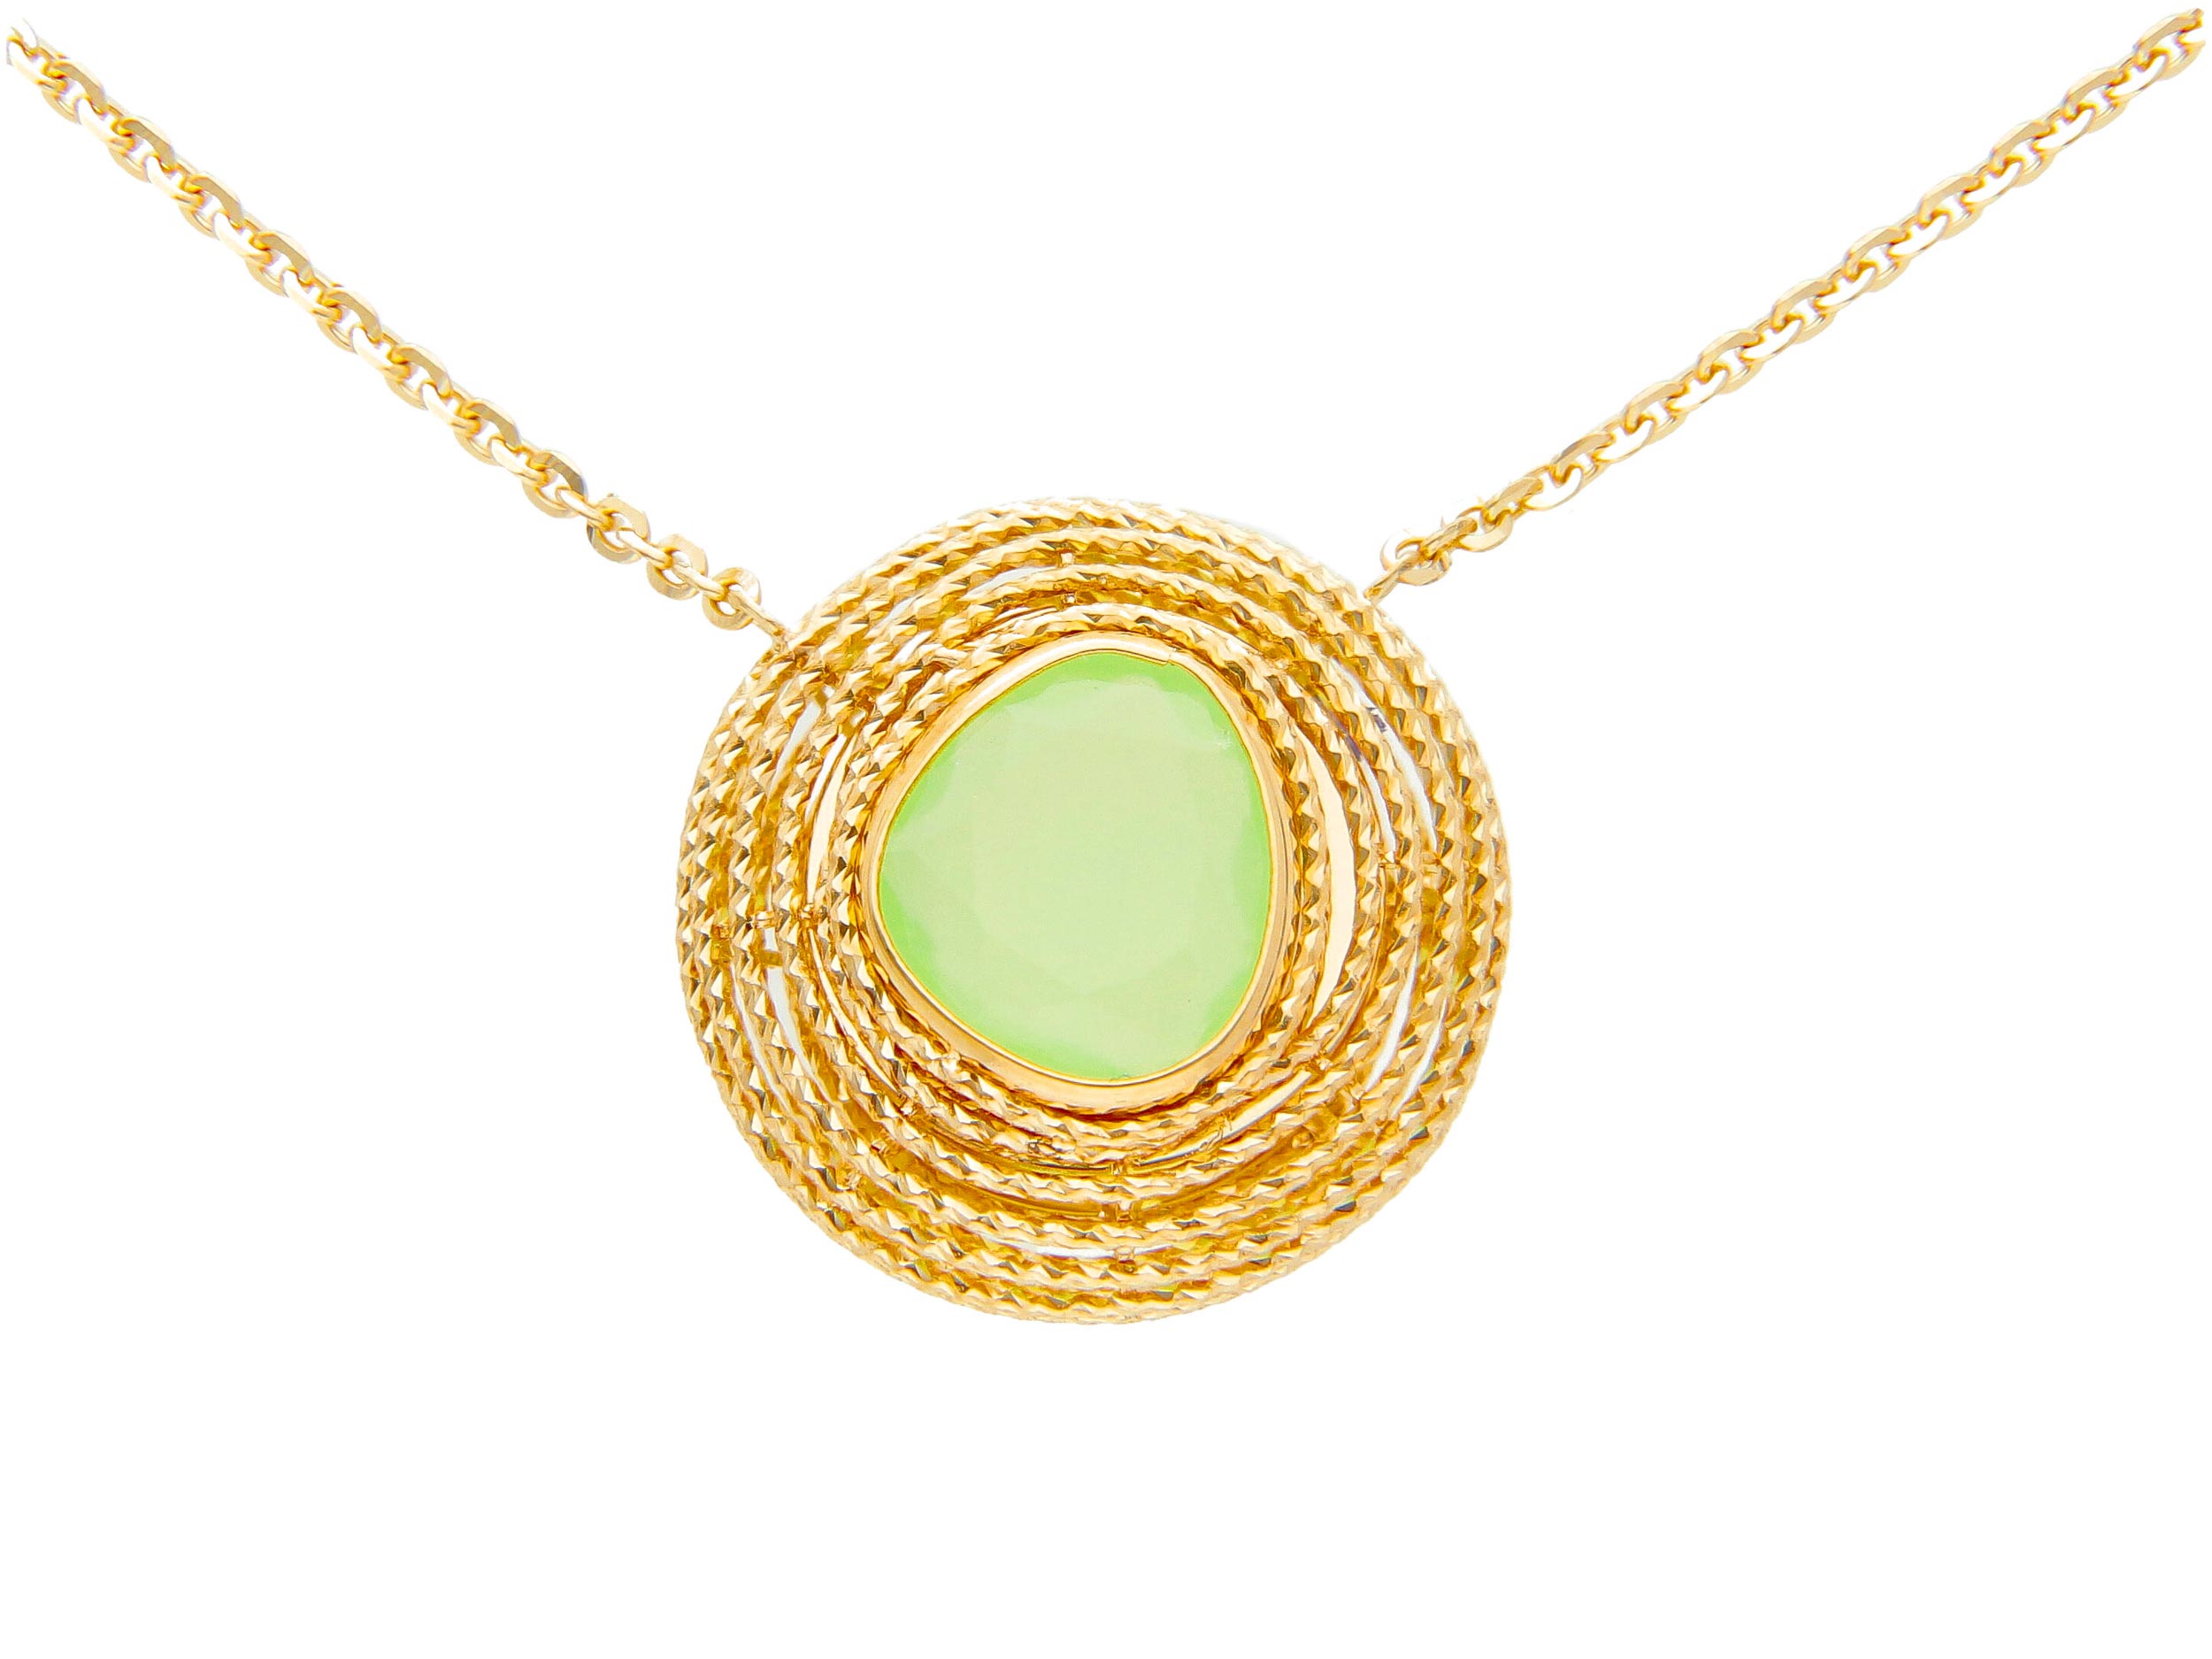 Beautiful 18ct Yellow Gold Fixed Pendant Necklace With Aventurine Quarts. We have different diferent stones available . Contact us for more information about the colours of enamel, gold and stones in our shop.